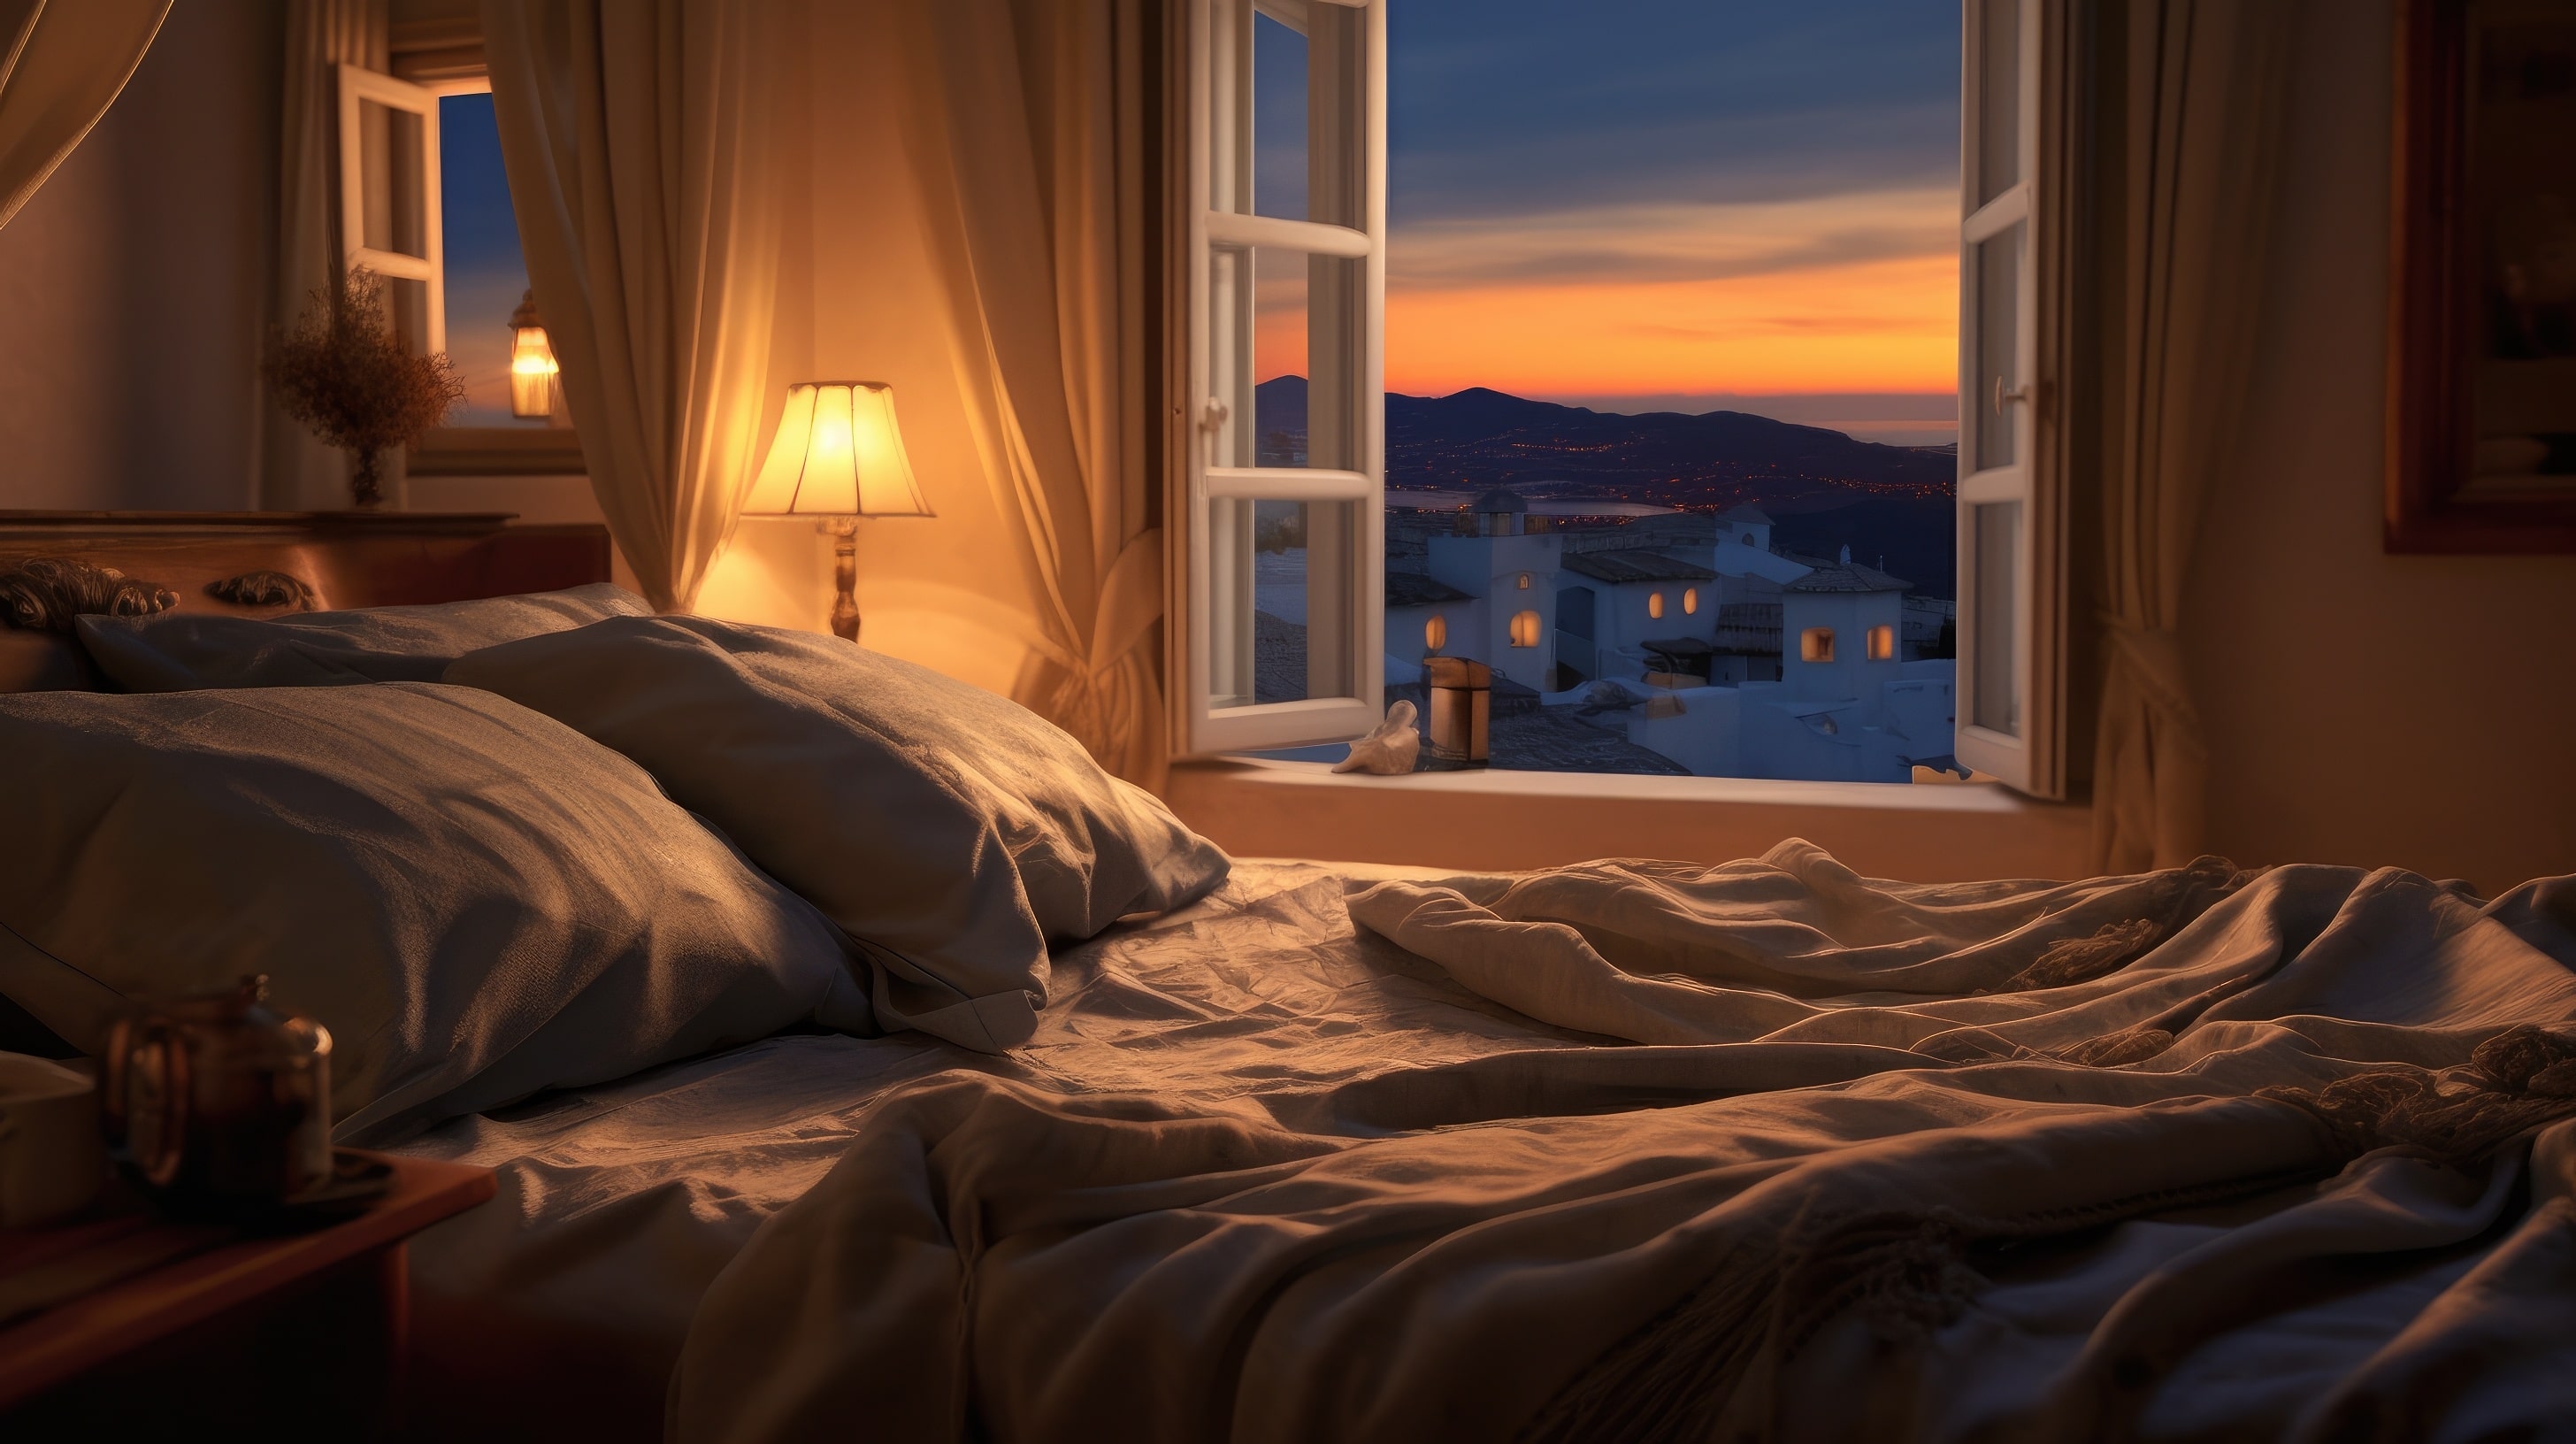 An empty bed with an open window at dusk allowing cool air to circulate after a hot day